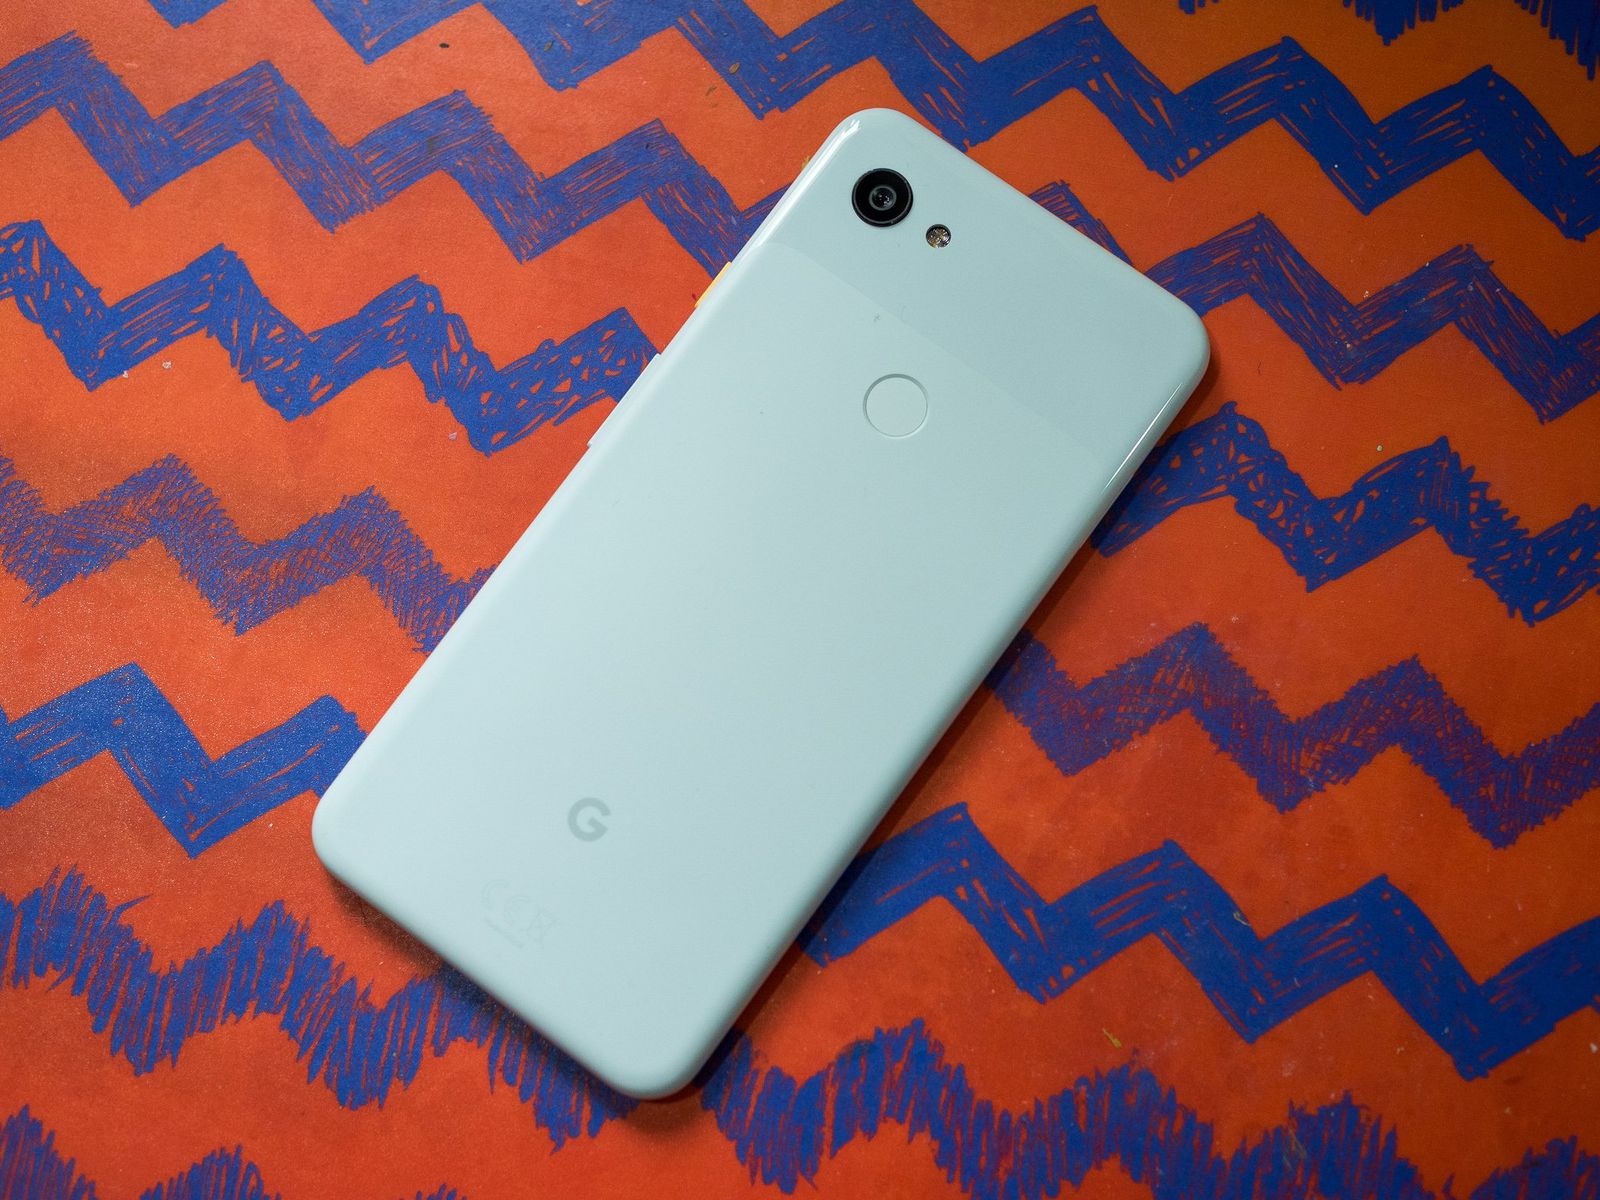 Pixel's exceptional camera delivers again